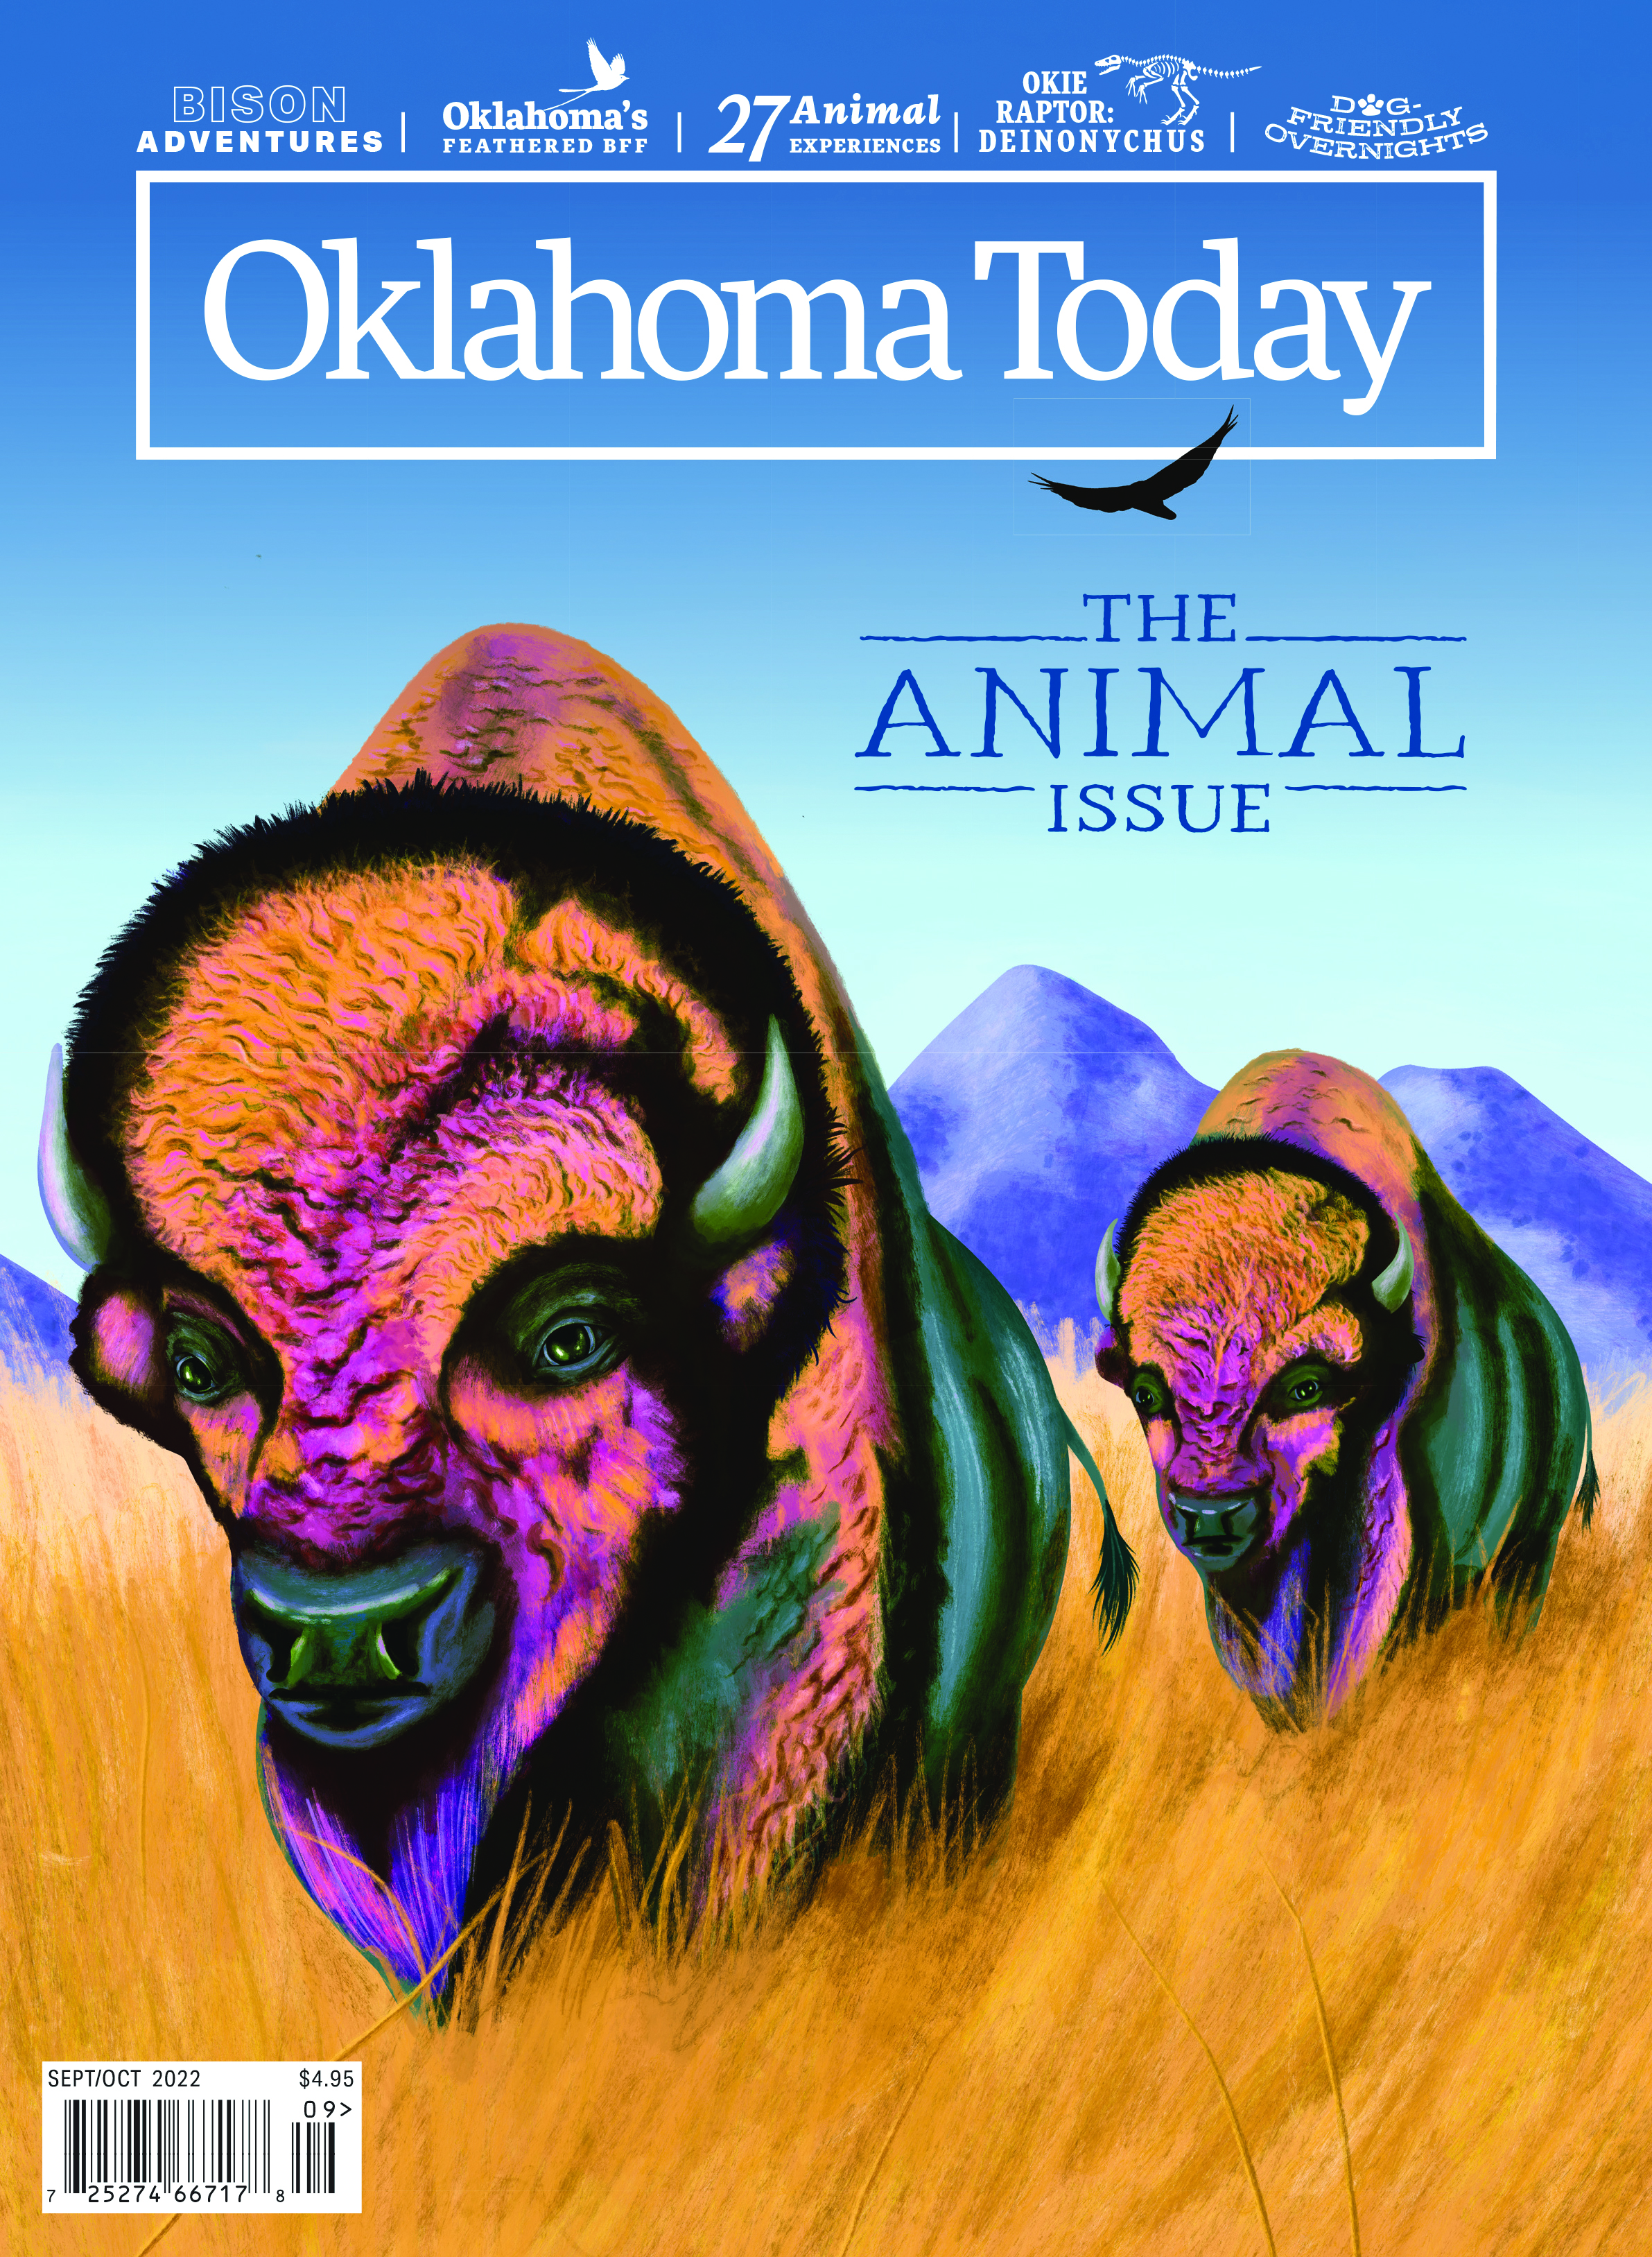 Oklahoma Today “The Animal Issue” September/October 2022